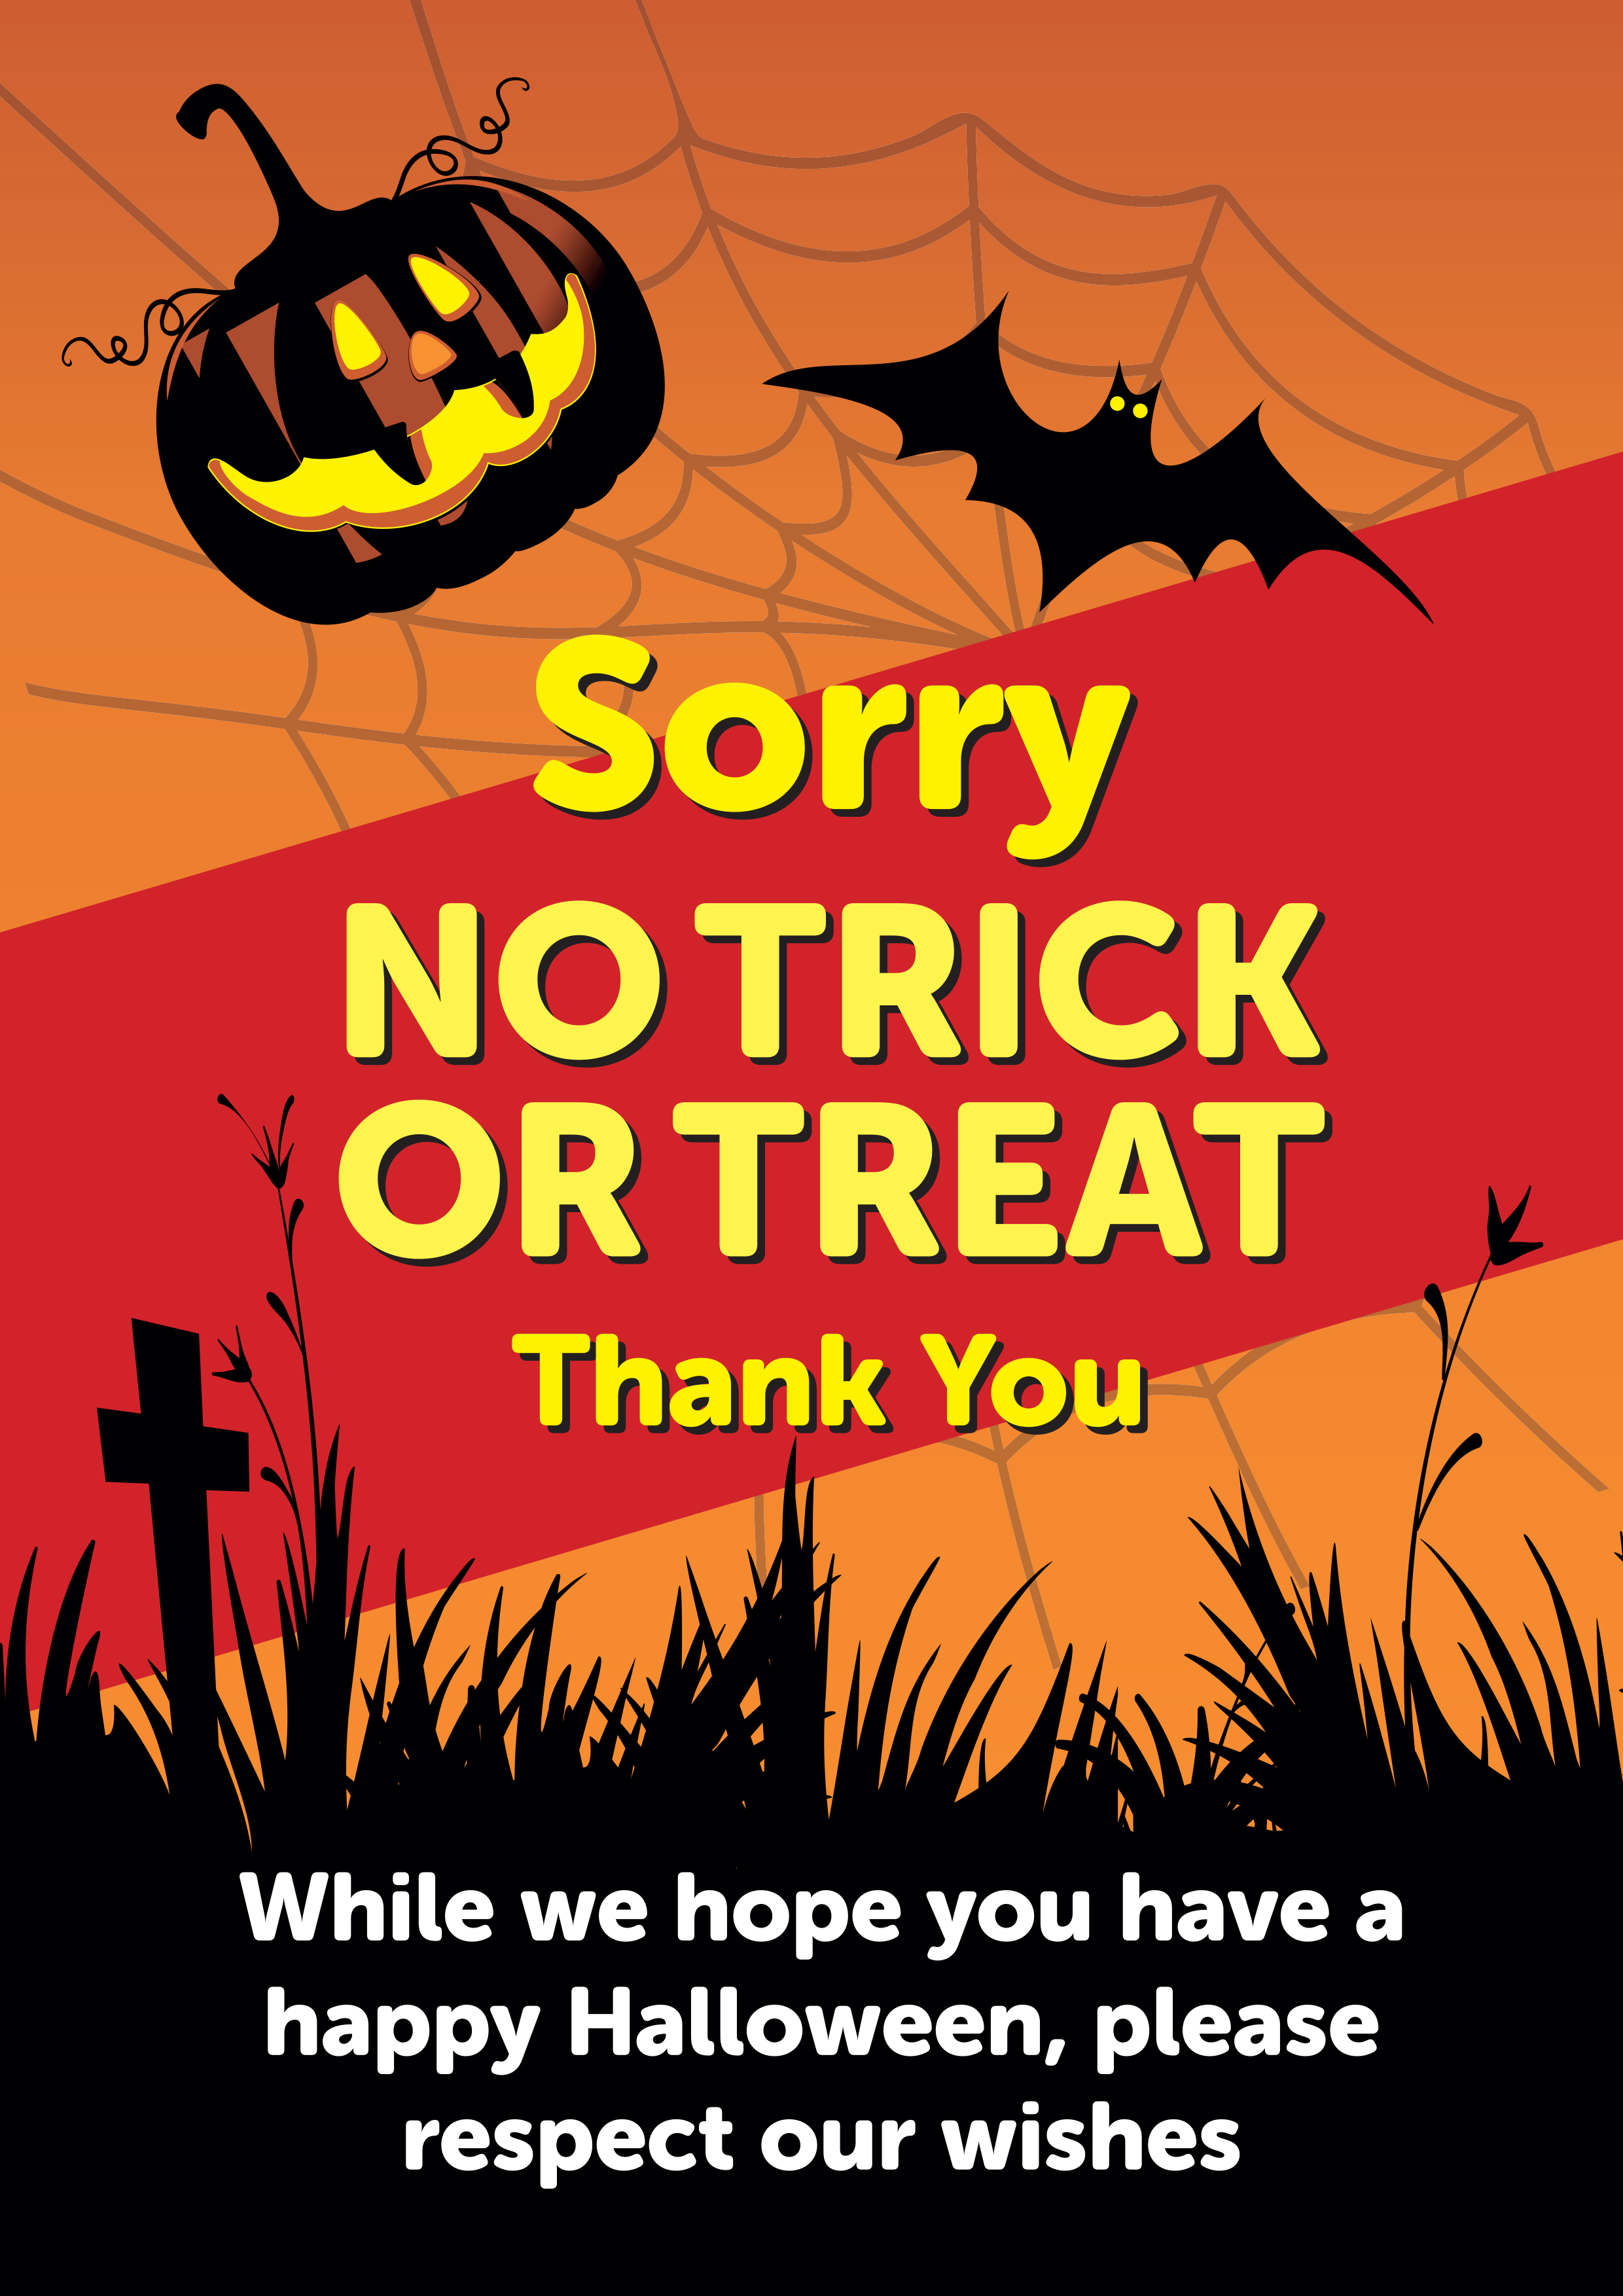 Print this free poster so you’re not disturbed on Halloween